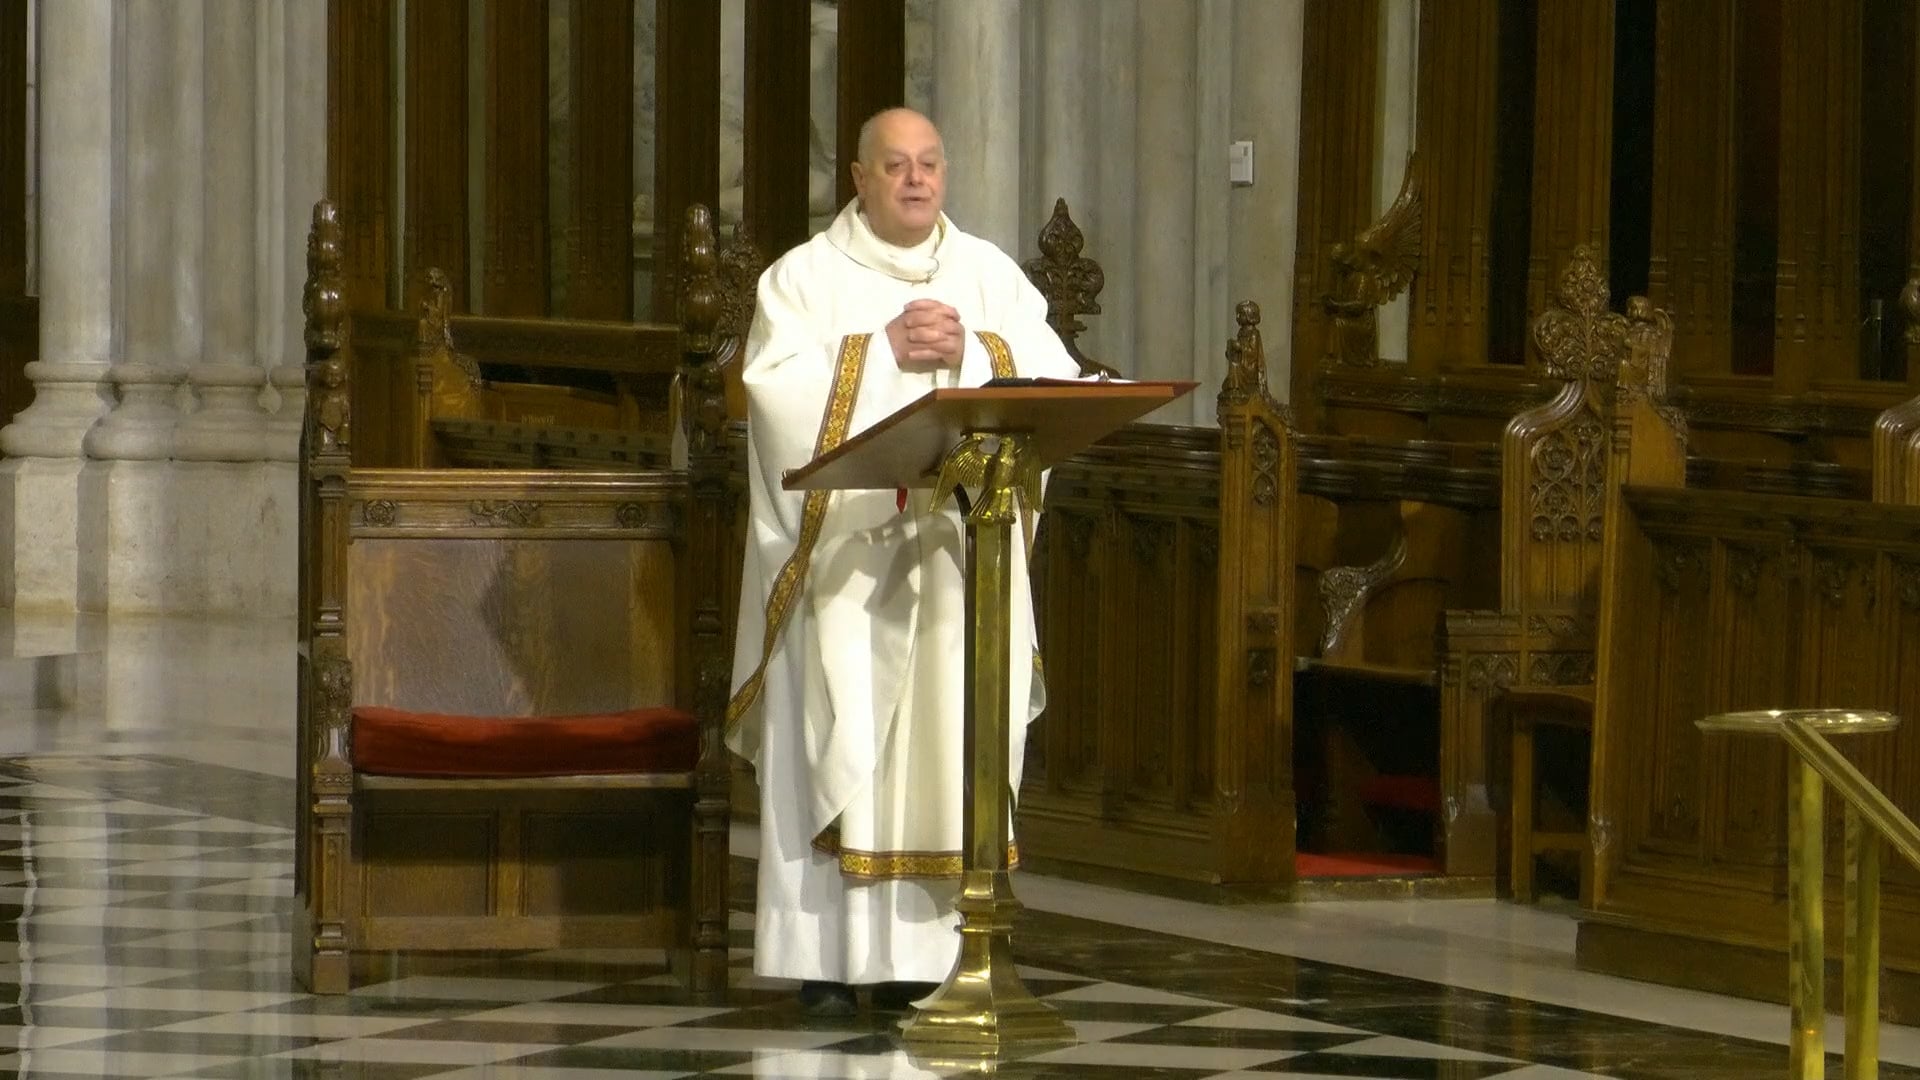 Mass from St. Patrick's Cathedral - January 16, 2023